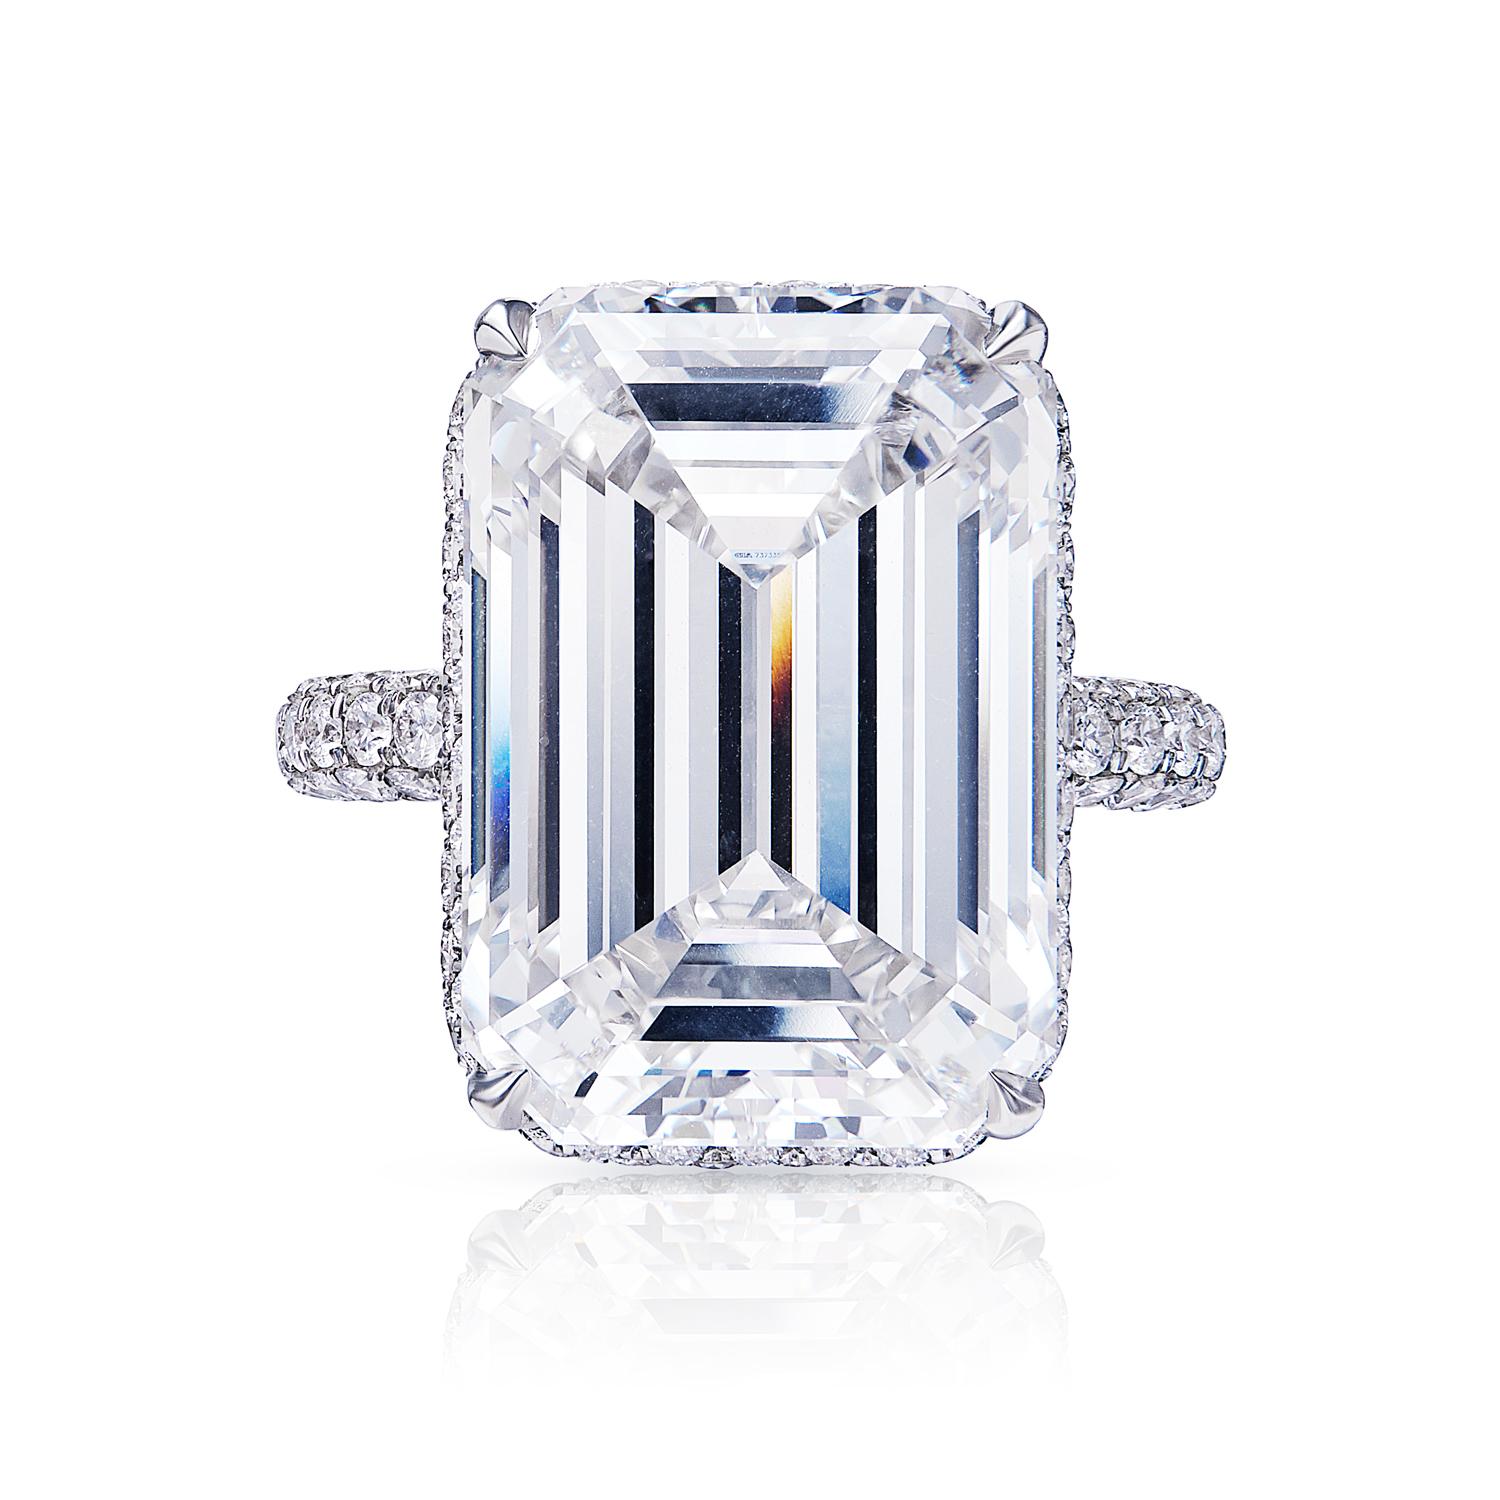 If you're looking for an emerald-cut diamond ring that is sure to impress, then look no further! This stunning ring features a beautiful emerald cut diamond that is prong set in a platinum band. The band itself is simple and elegant, allowing the